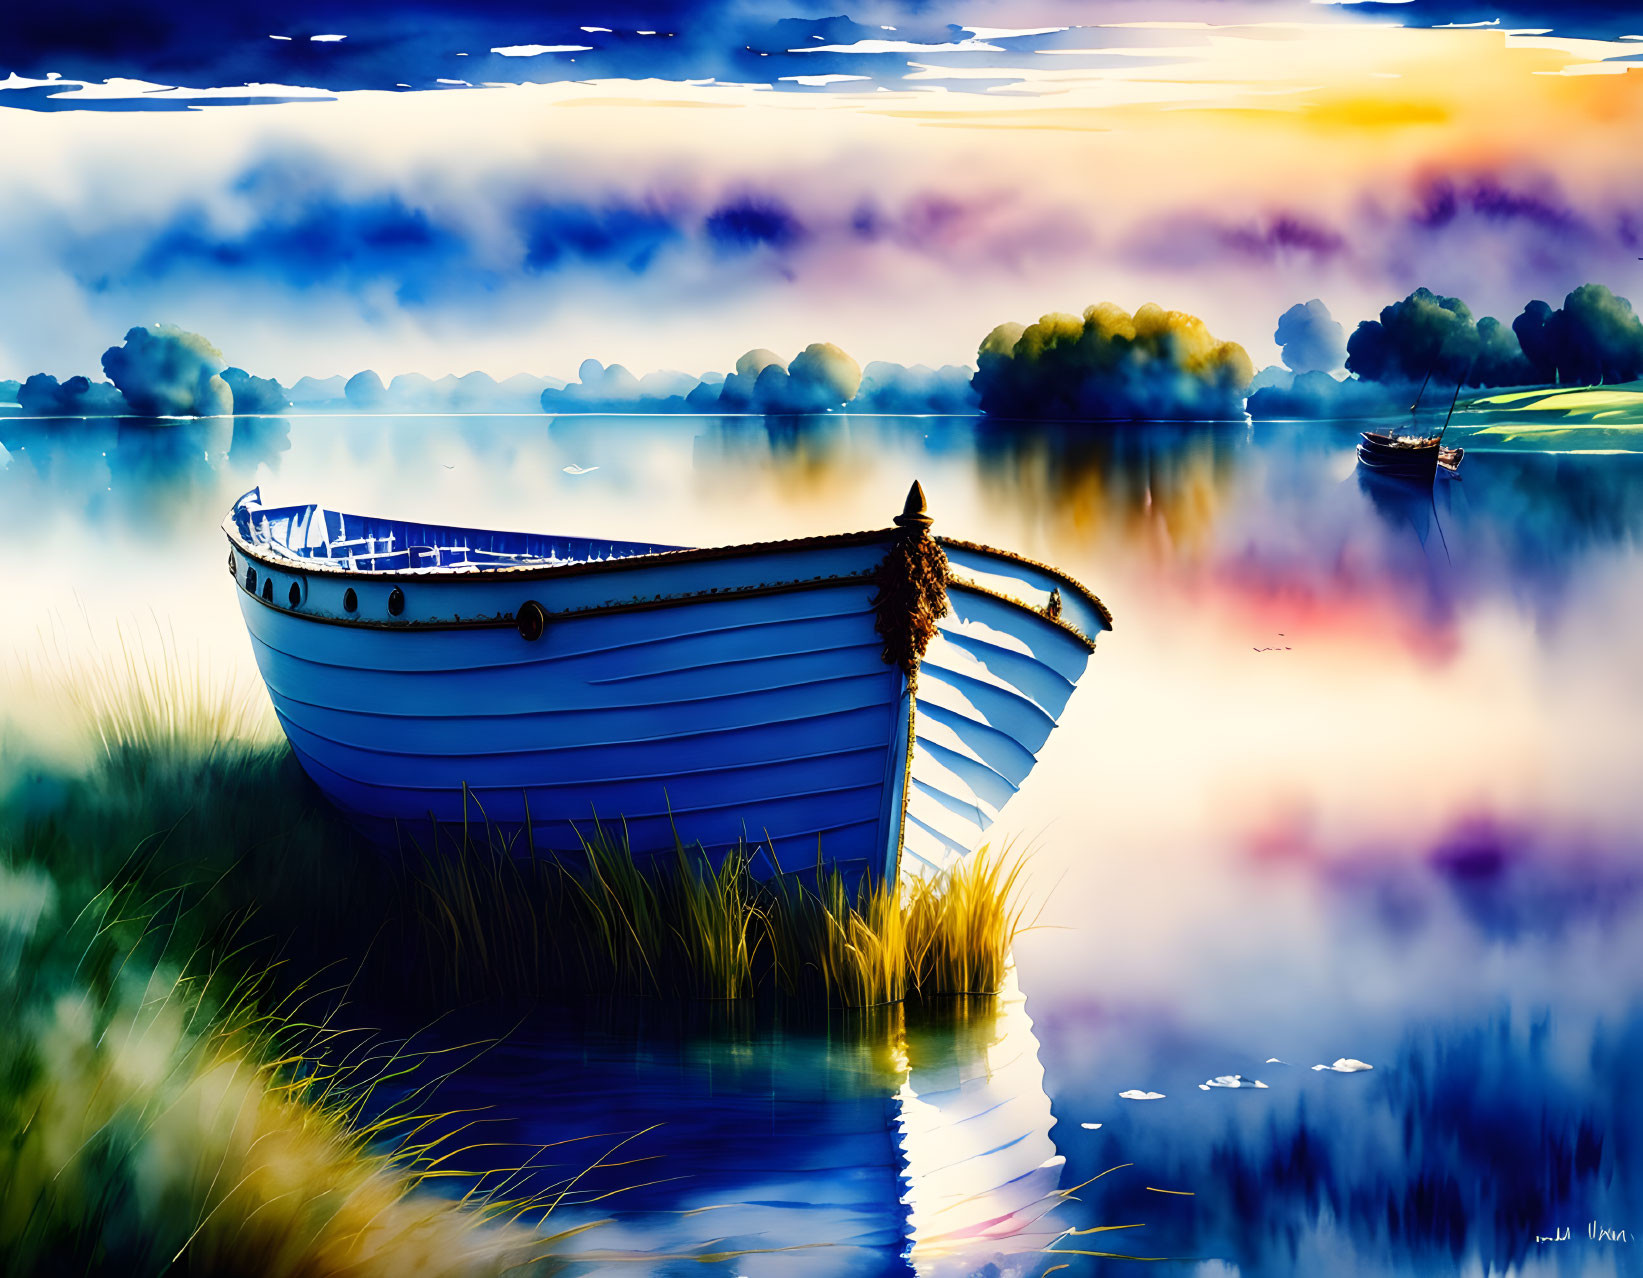 Serene landscape digital painting with boat, lush greenery, colorful sky